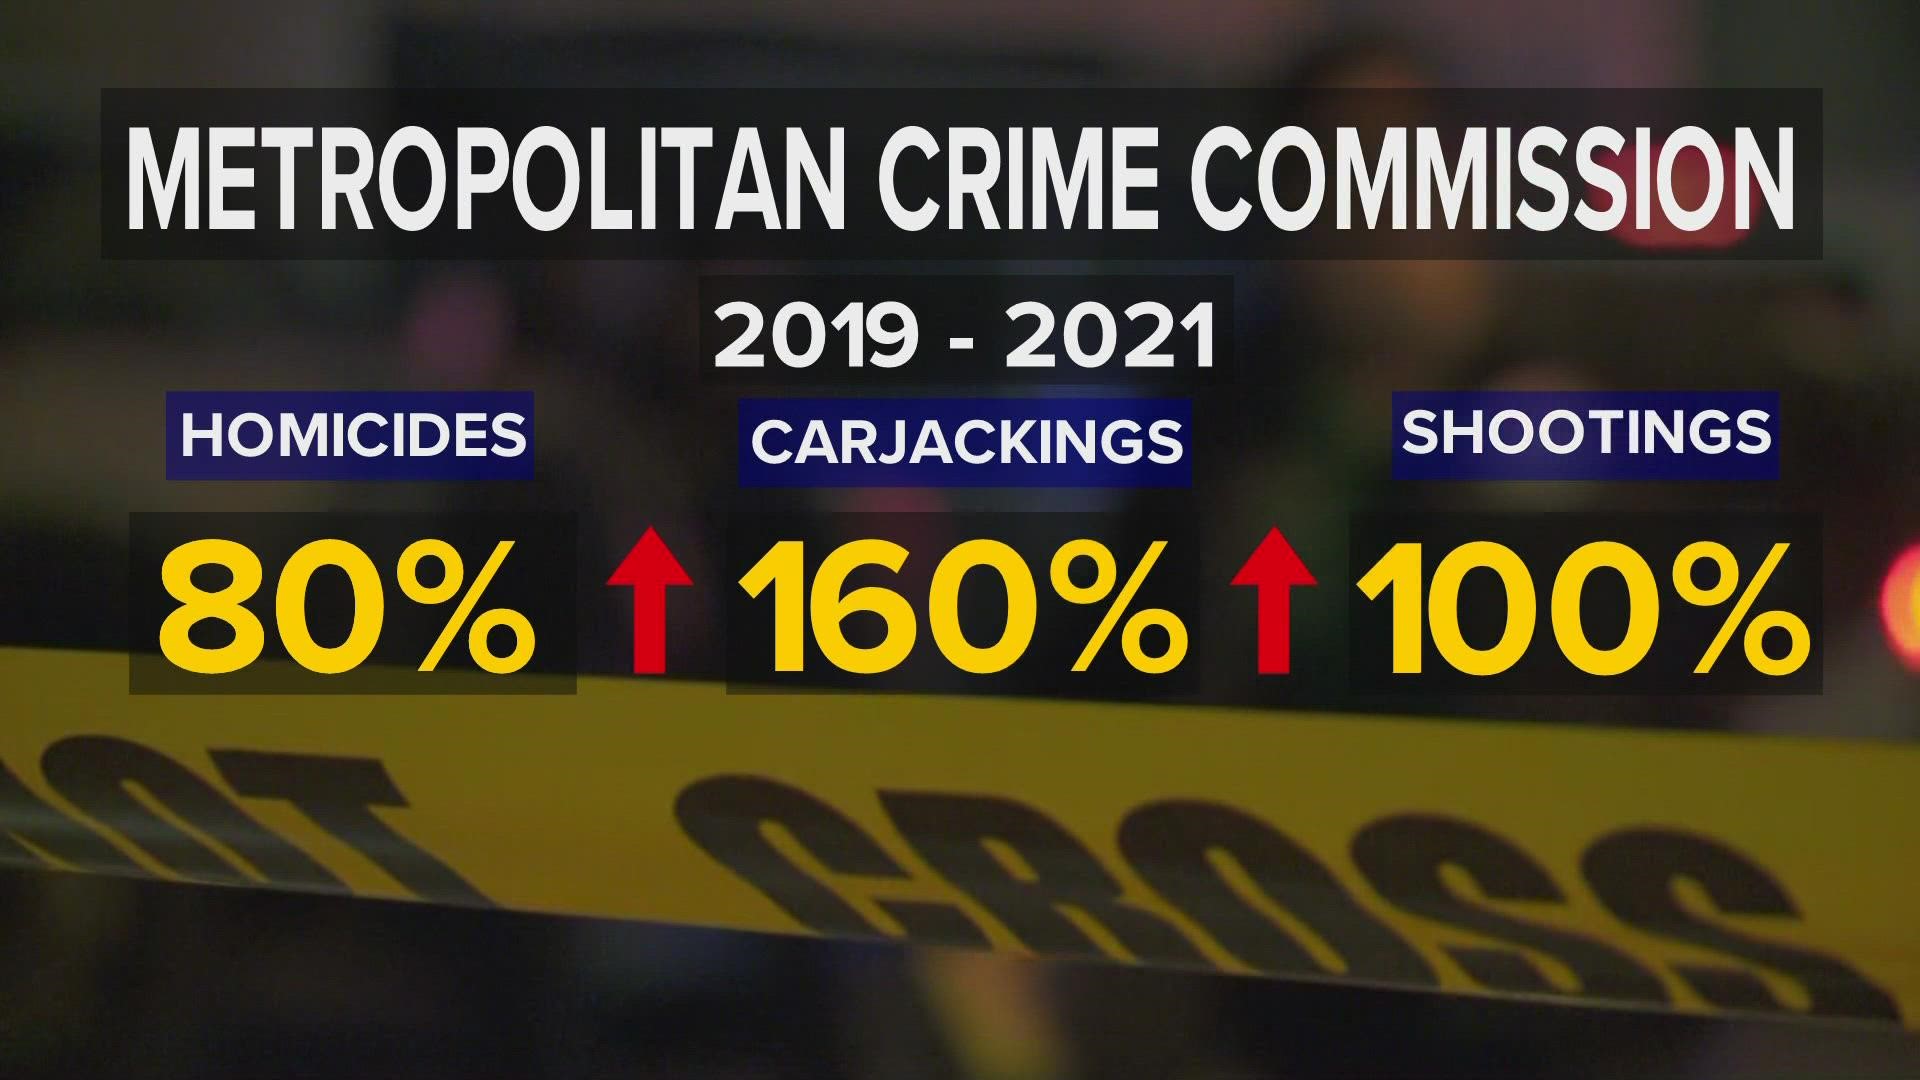 The crime rate in New Orleans is on a steady rise and is showing more incidents than the years prior.